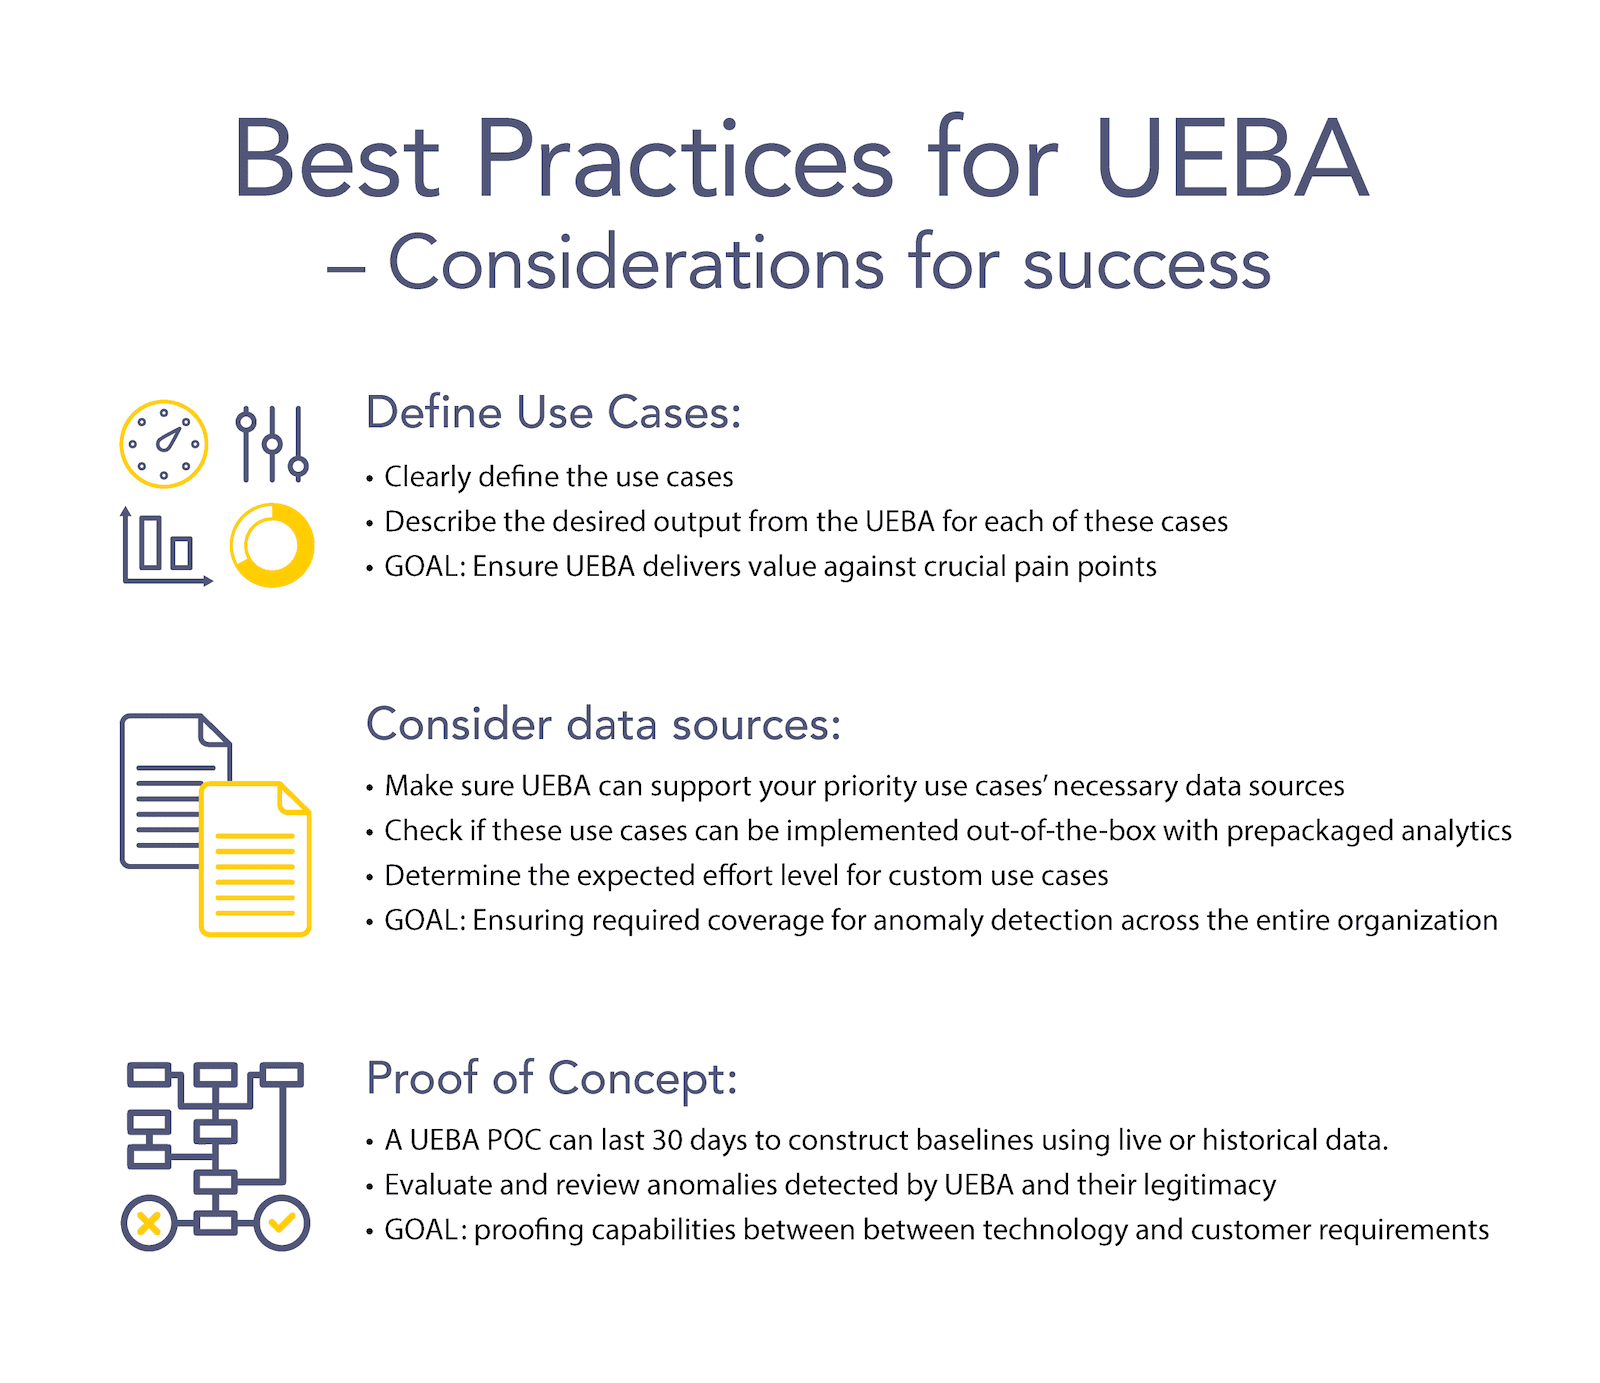 Best Practices for UEBA Infographic